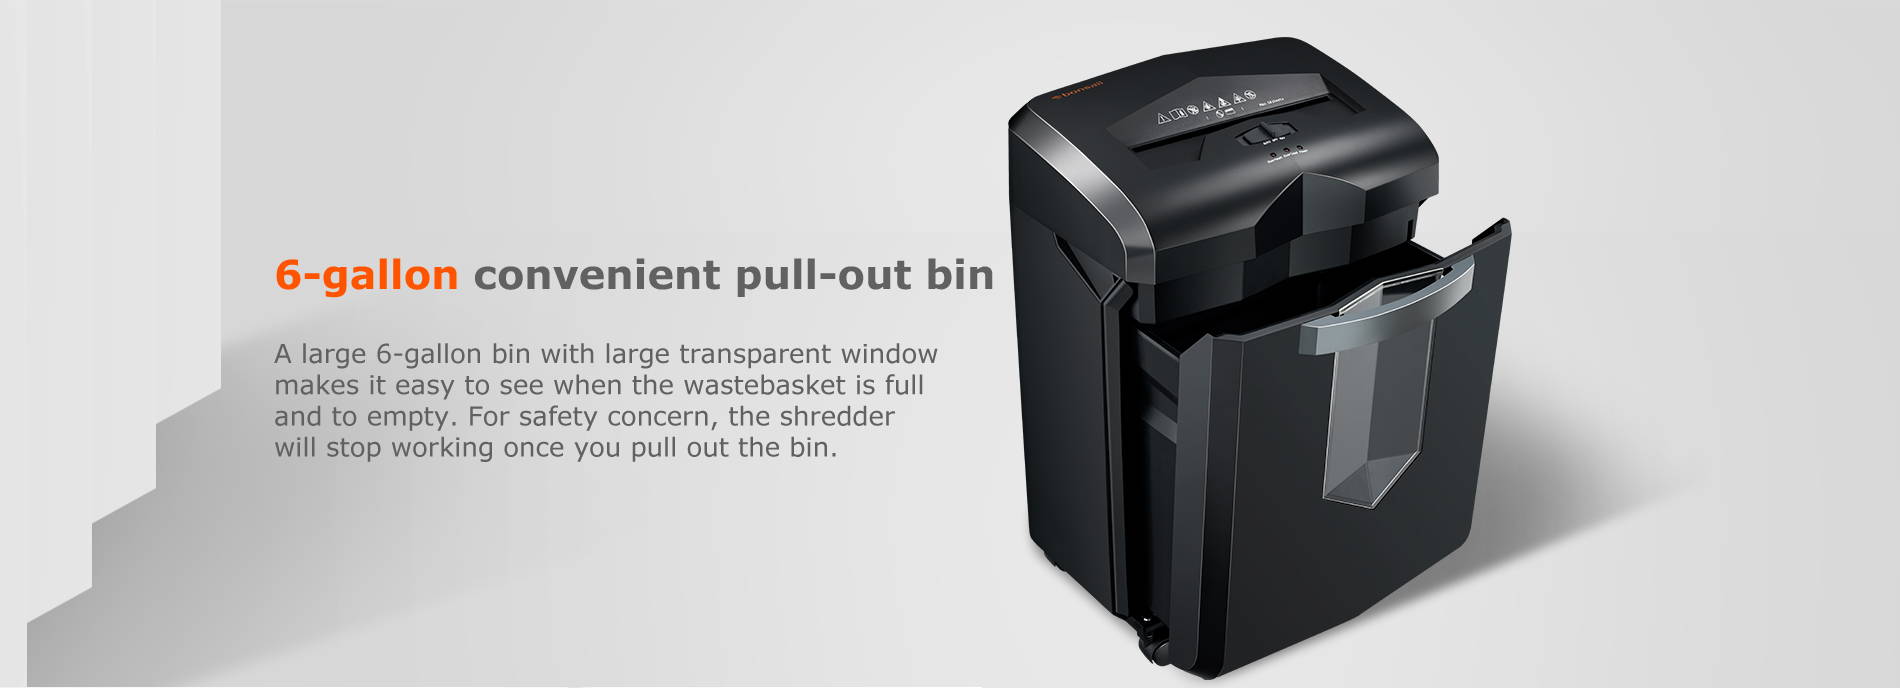 6-gallon convenient pull-out bin A large 6-gallon bin with large transparent window makes it easy to see when the wastebasket is full and to empty. For safety concern, the shredder will stop working once you pull out the bin